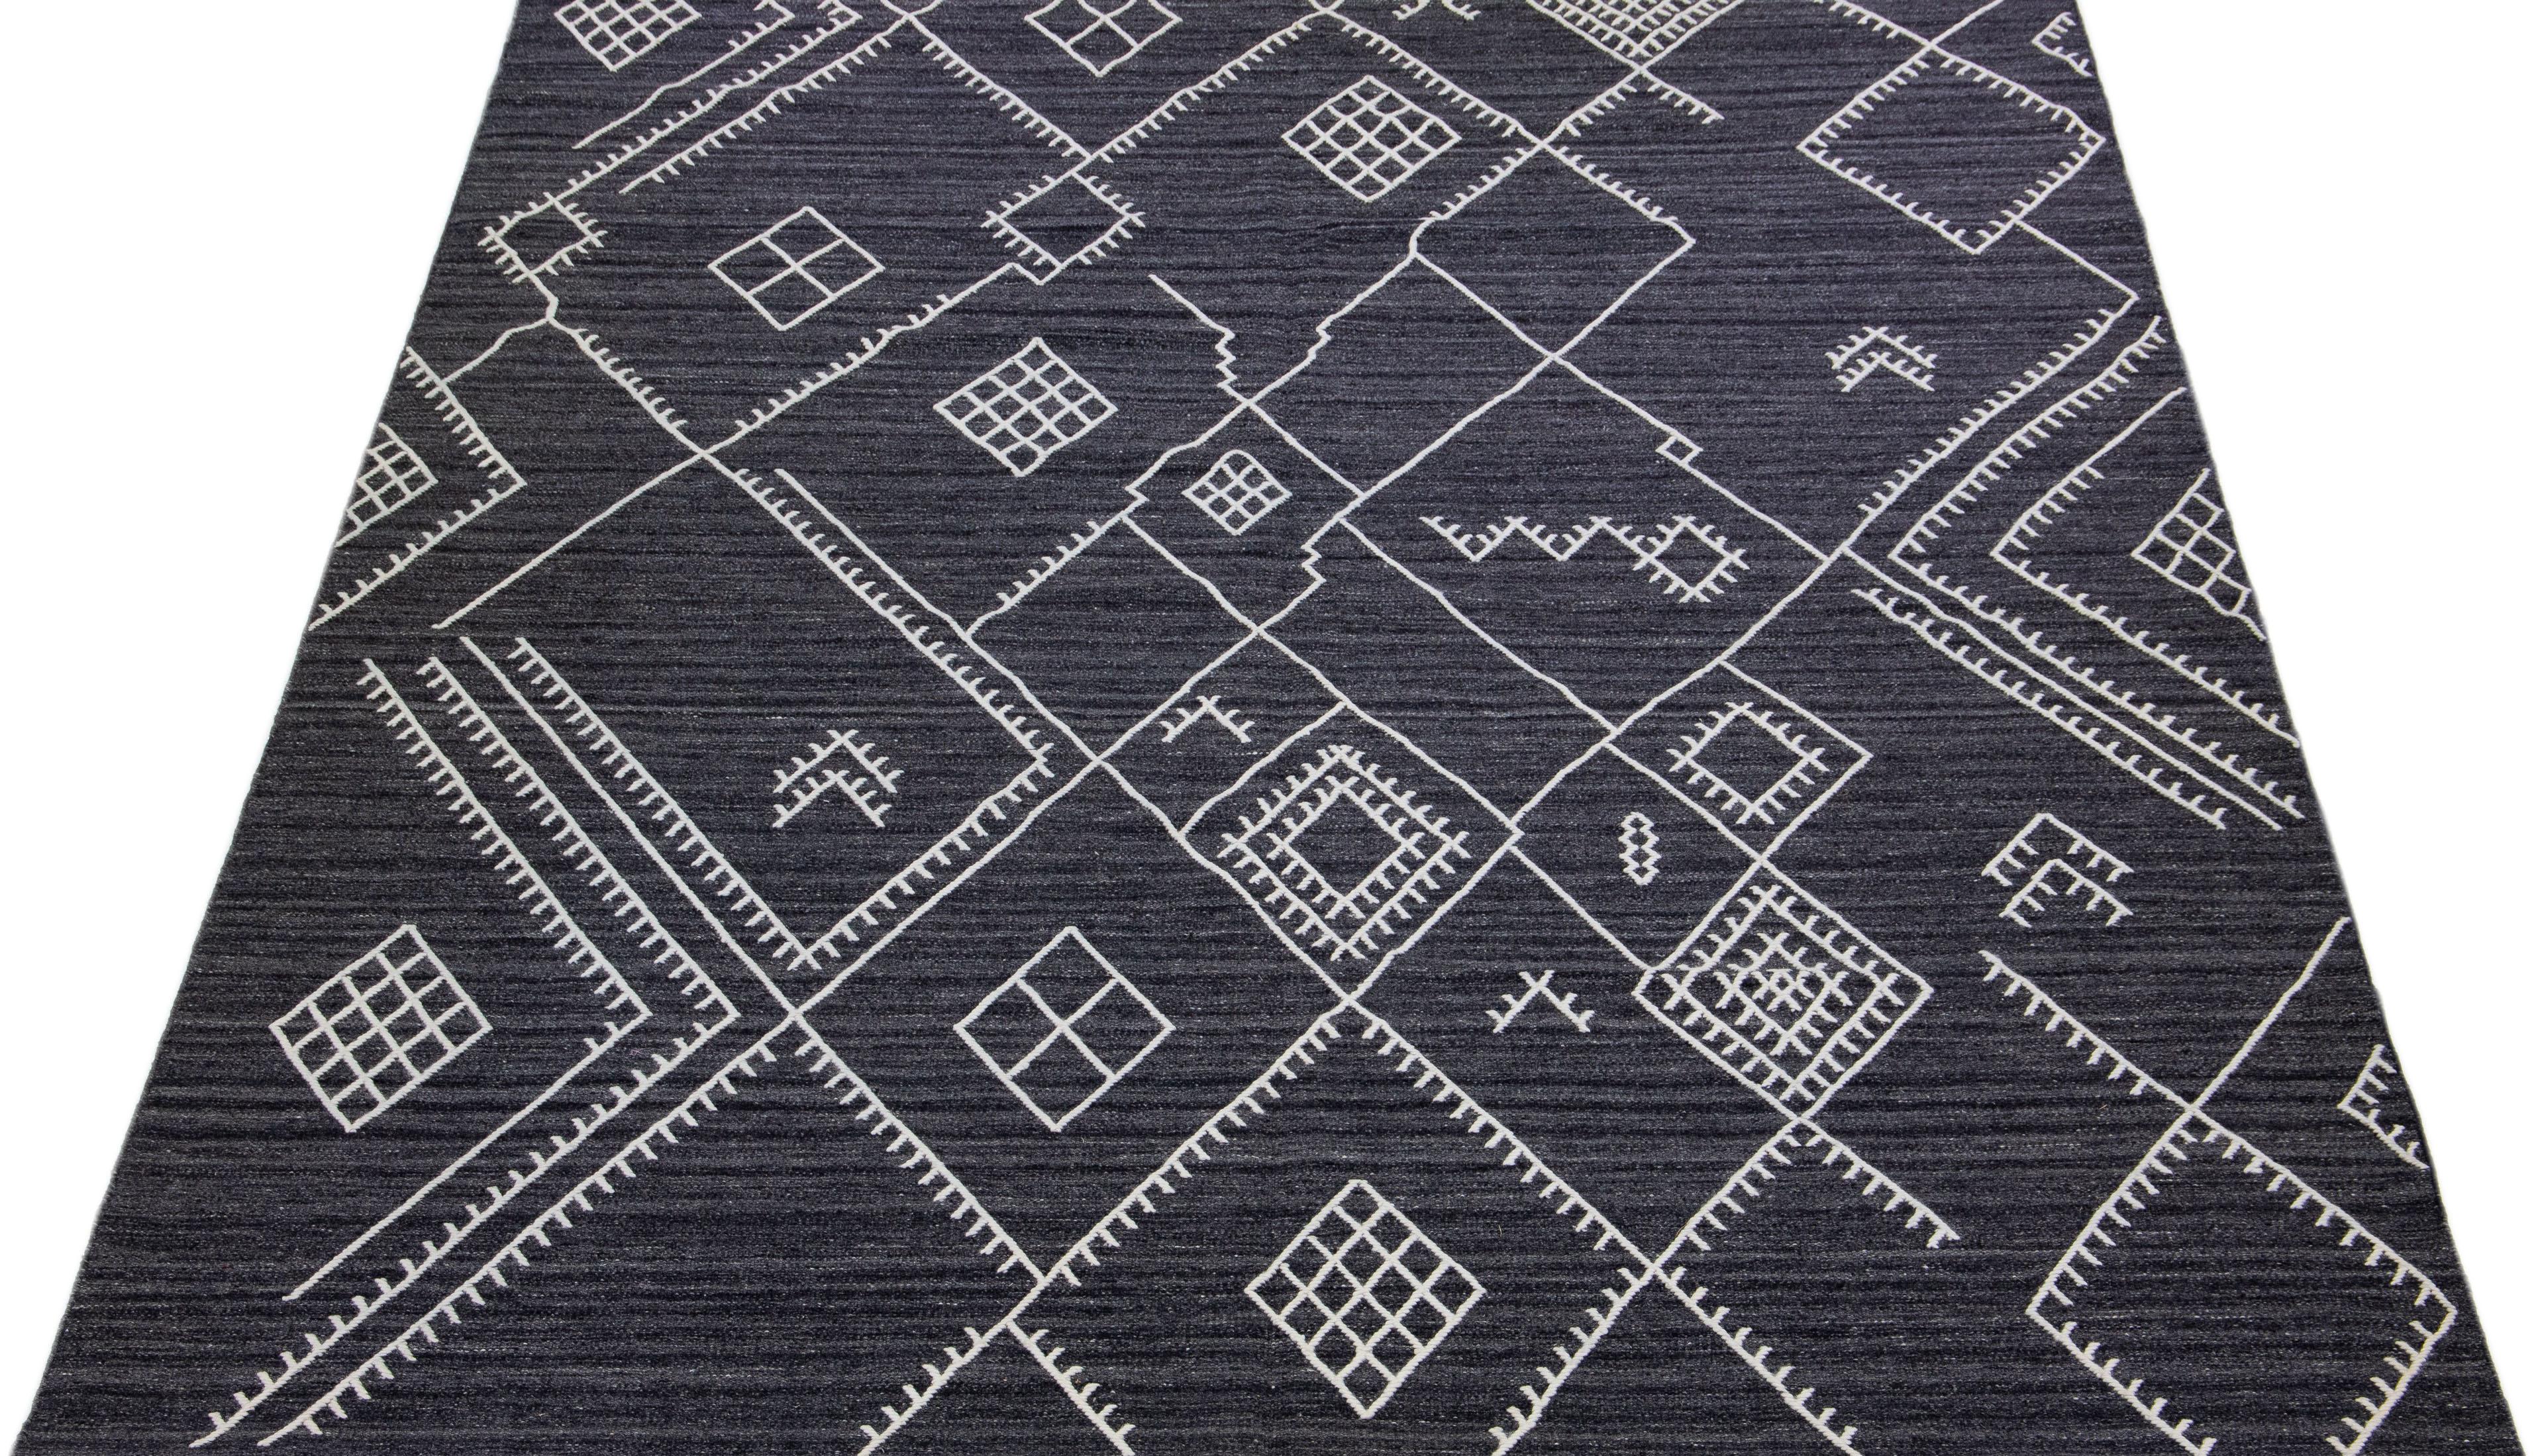 Beautiful kilim handmade wool rug with a gray-charcoal field. This custom modern flatweave rug of our Nantucket collection has white accents and a gorgeous, all-over geometric coastal design.

This rug measures: 10'2